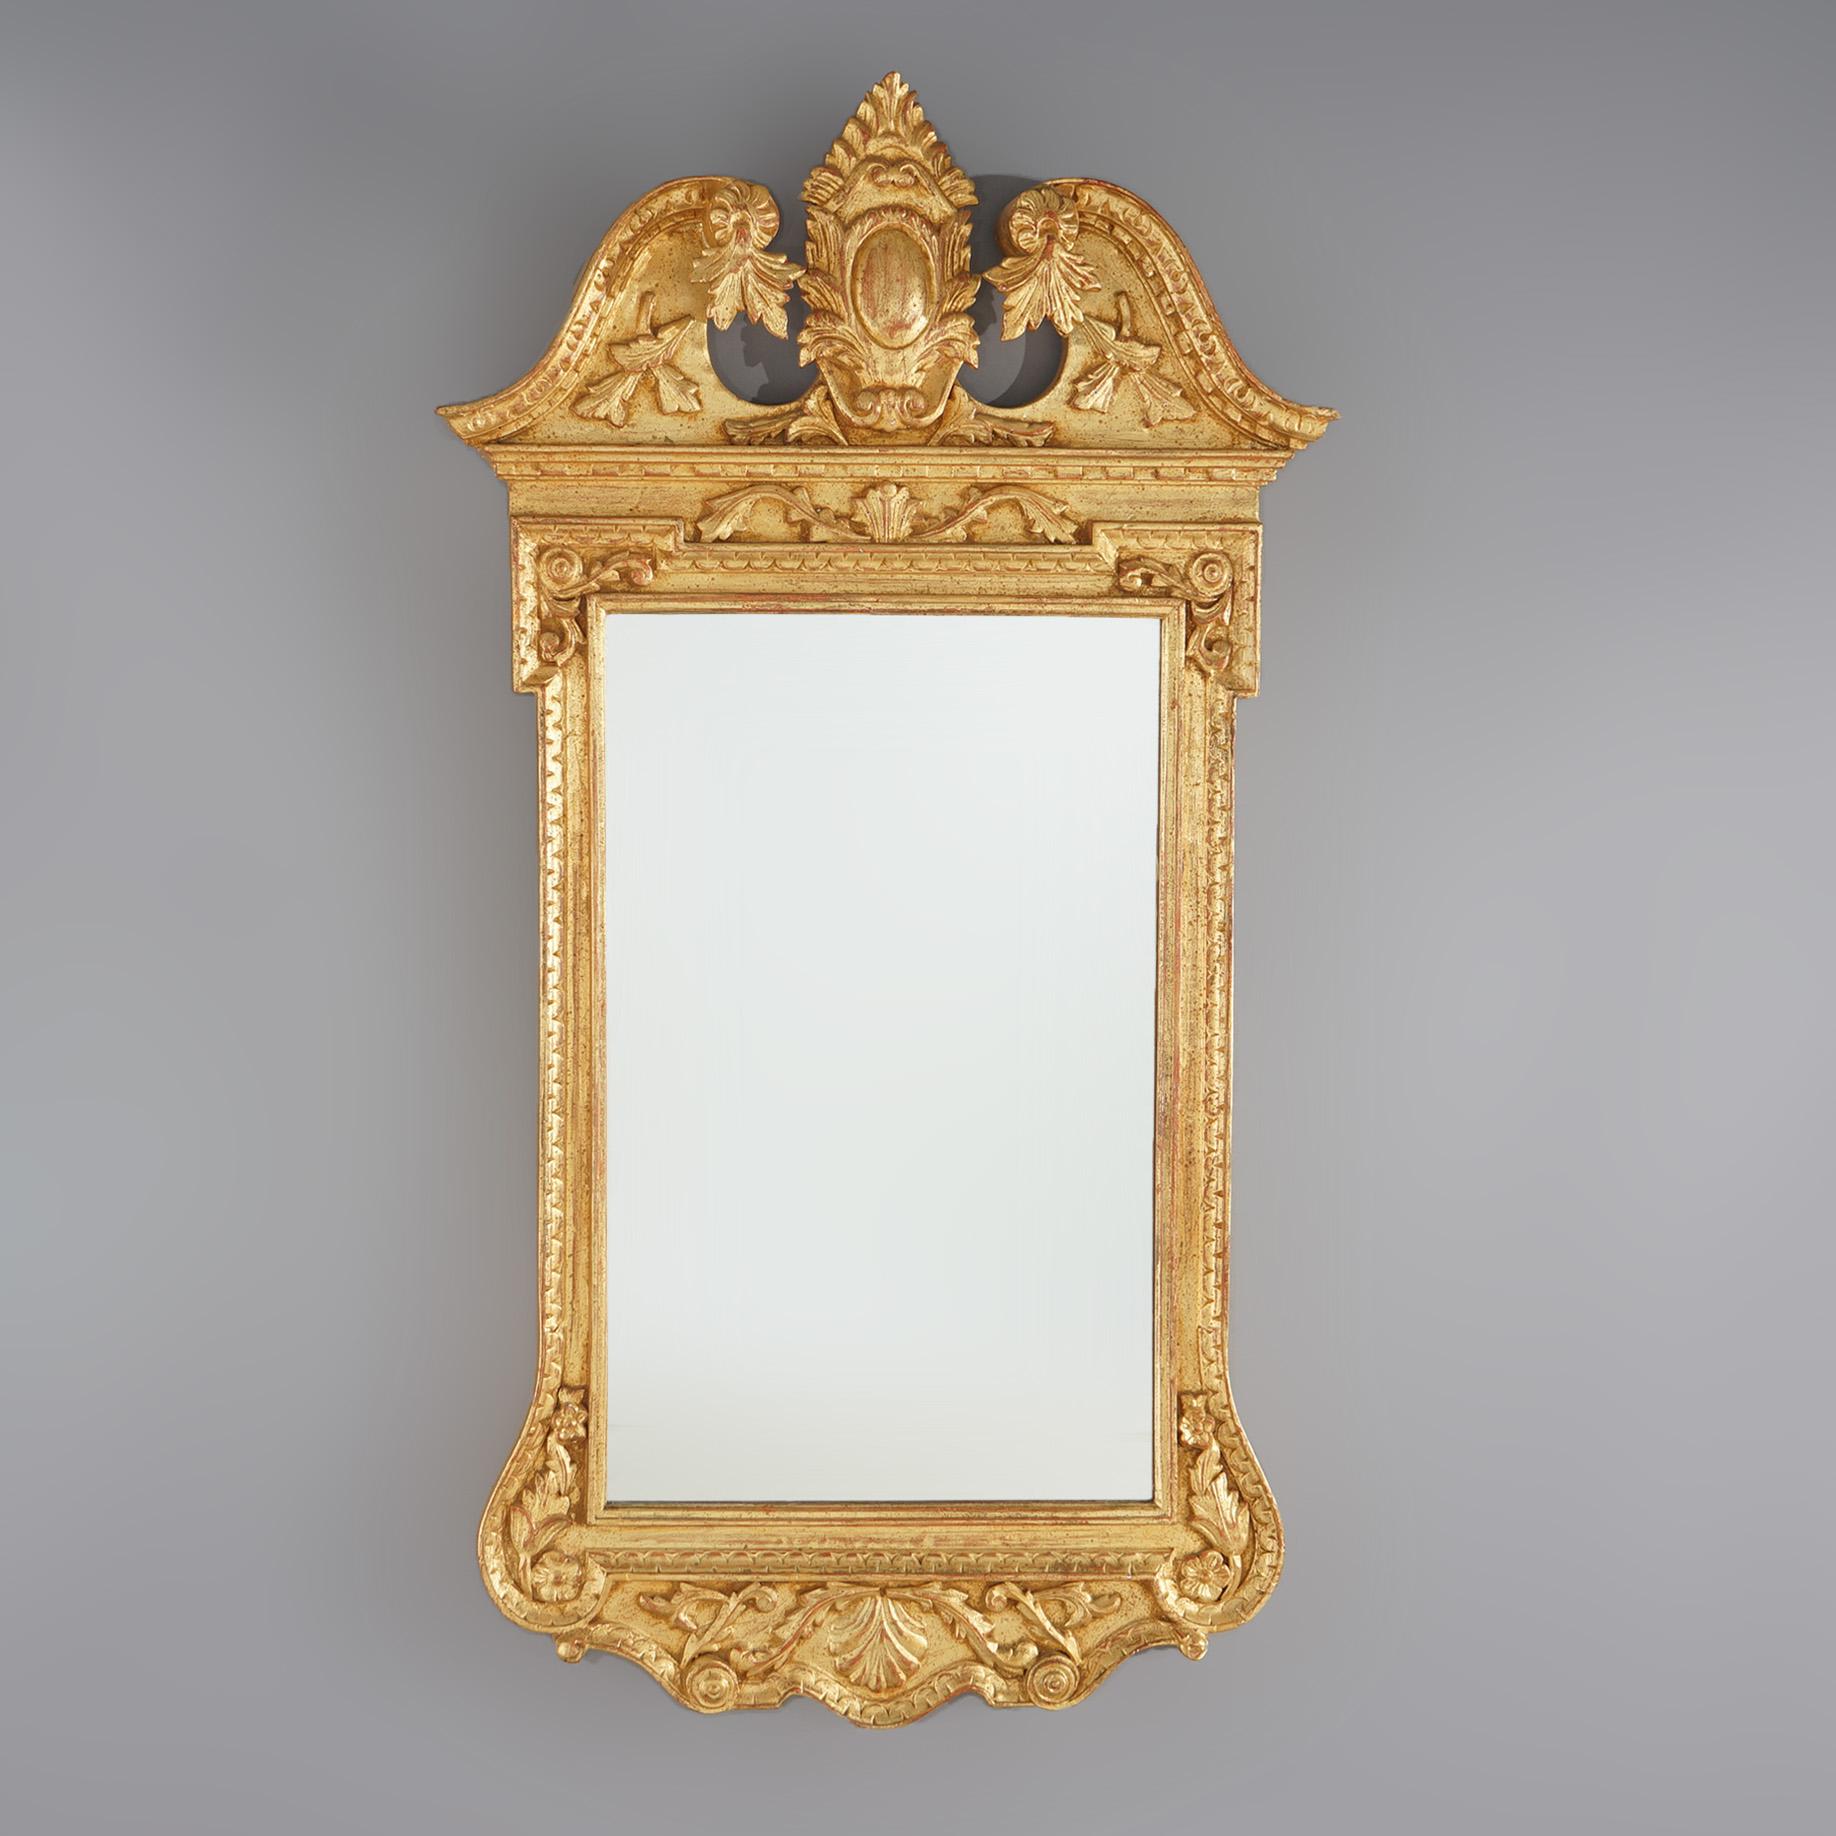 French Louis XIV style wall mirror features scroll and foliate broken arch pediment with central shield, lower with scroll and foliate apron with central shell and flanking scroll form corners, 20th century

Measures: 52